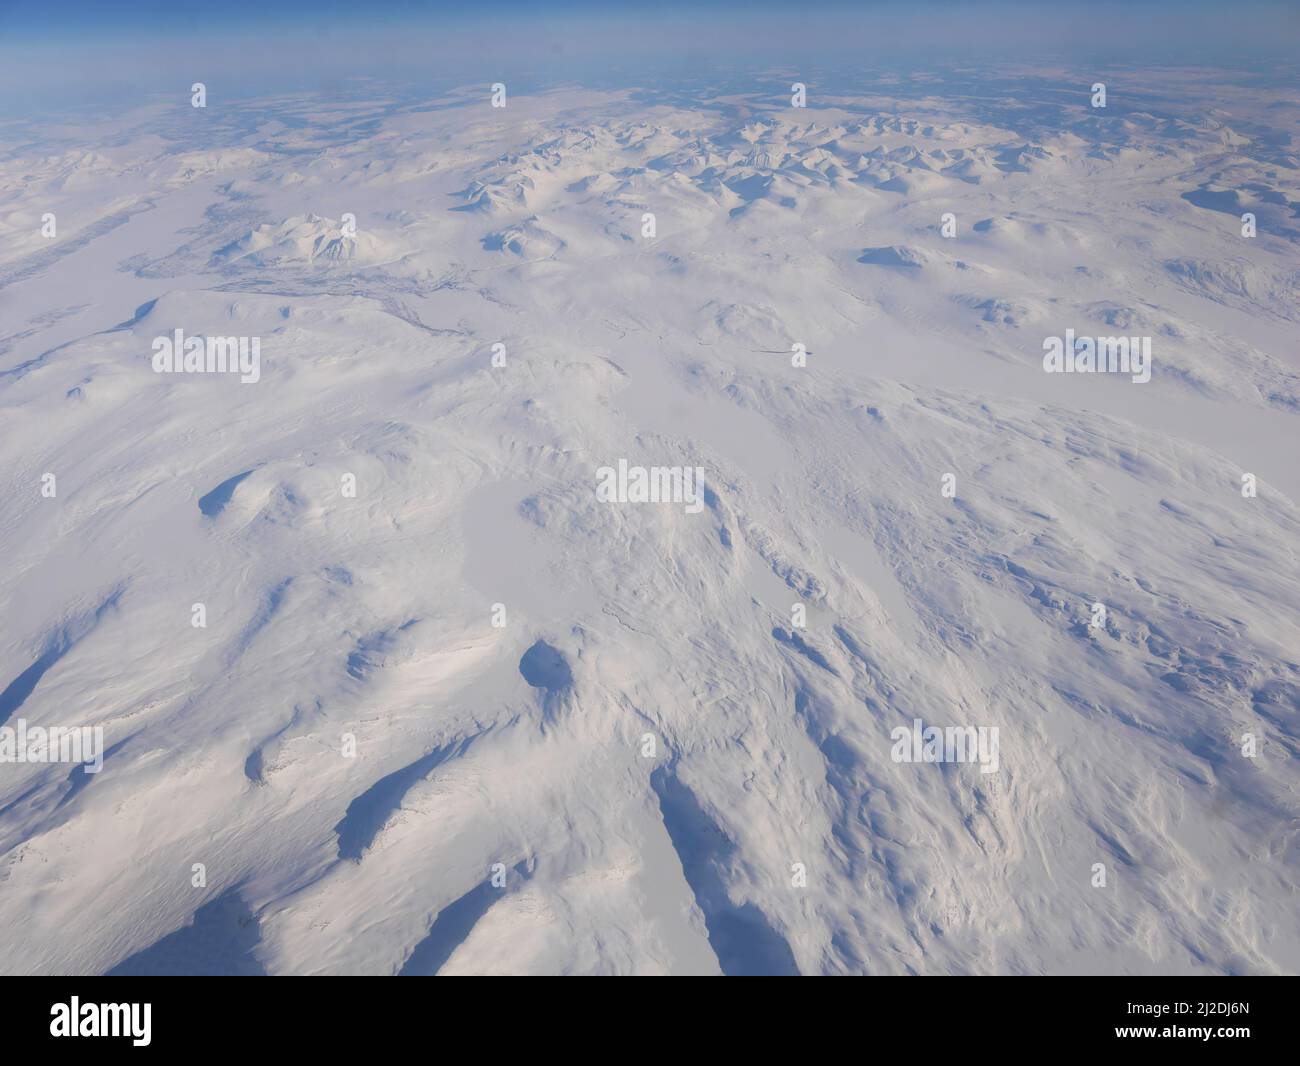 Aerial view of white snow covered Norway in winter, Snowscape wallpaper Stock Photo